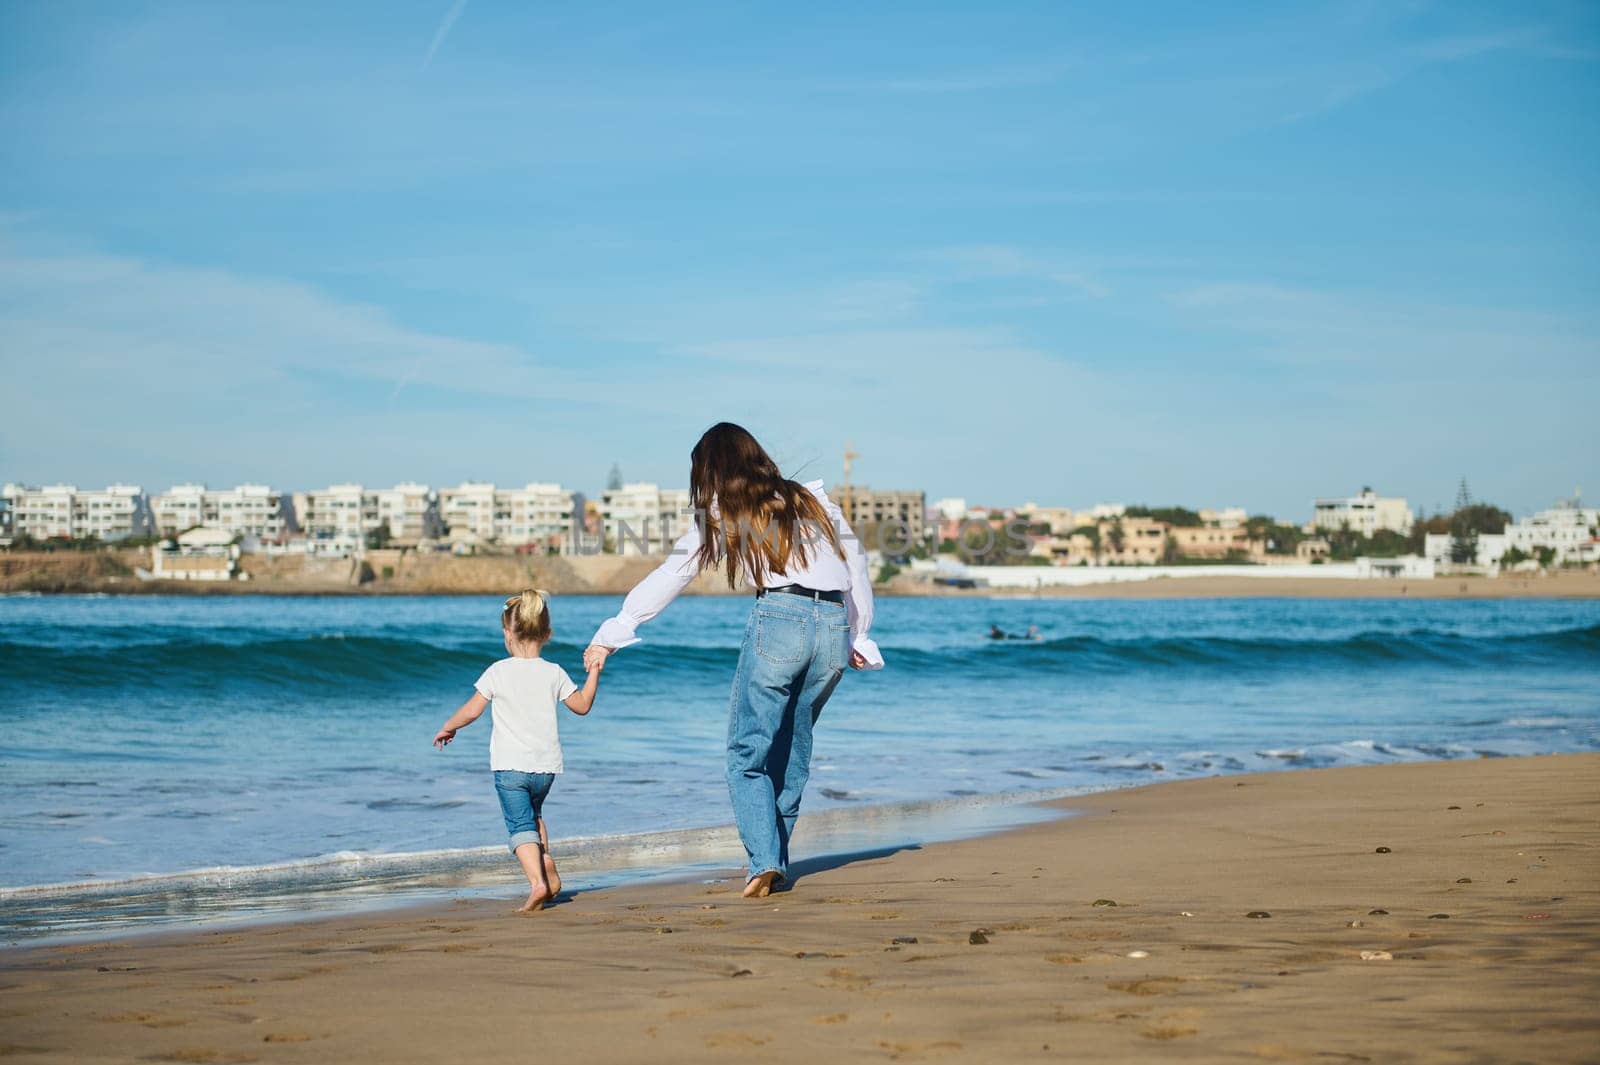 Caucasian blonde little child girl holding her mother's hand, while walking in the warm water along the sea, enjoying the waves washing her feet. People and nature. Active healthy lifestyle